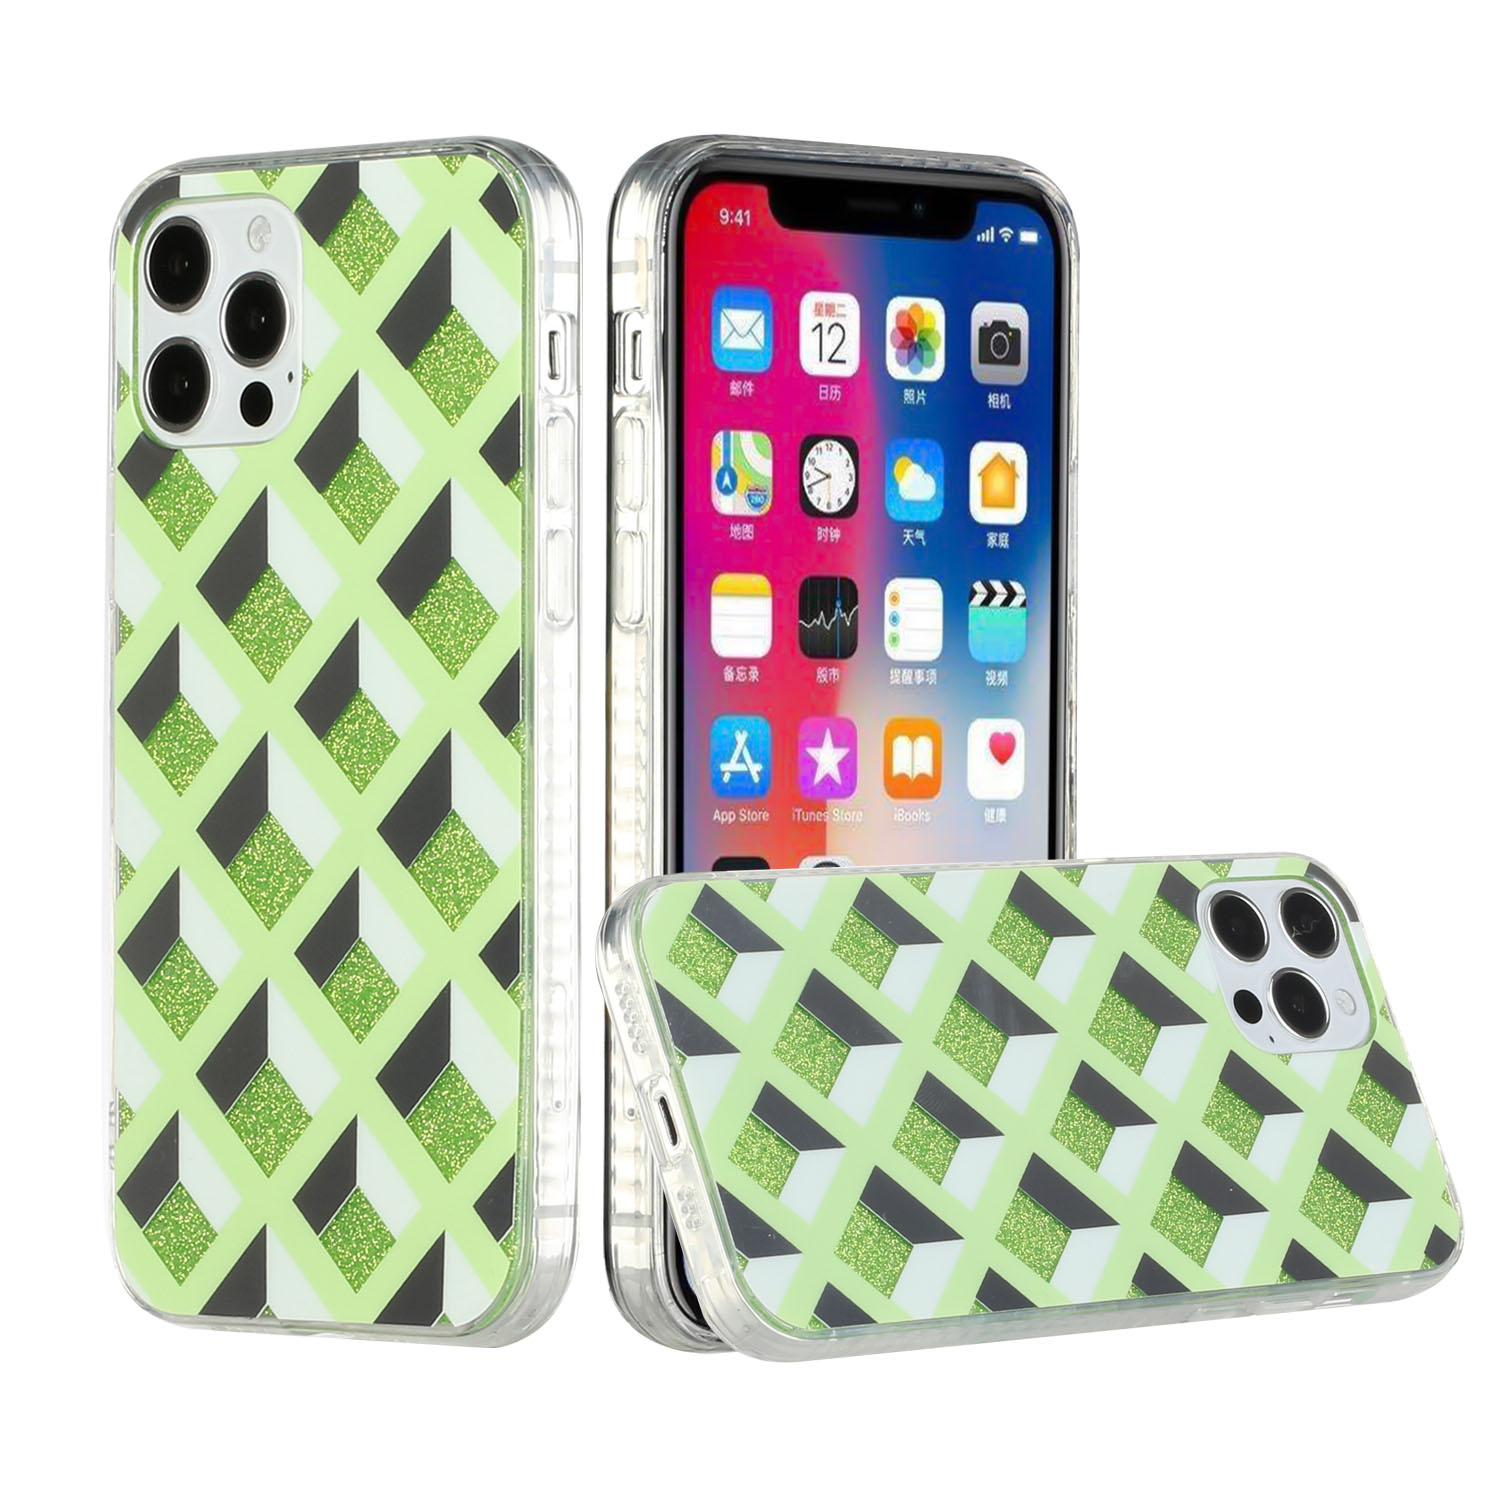 Apple Iphone 11 Case 3d Grid Electroplated Design Hybrid Case Cover Neon Green Cellphonecases Com